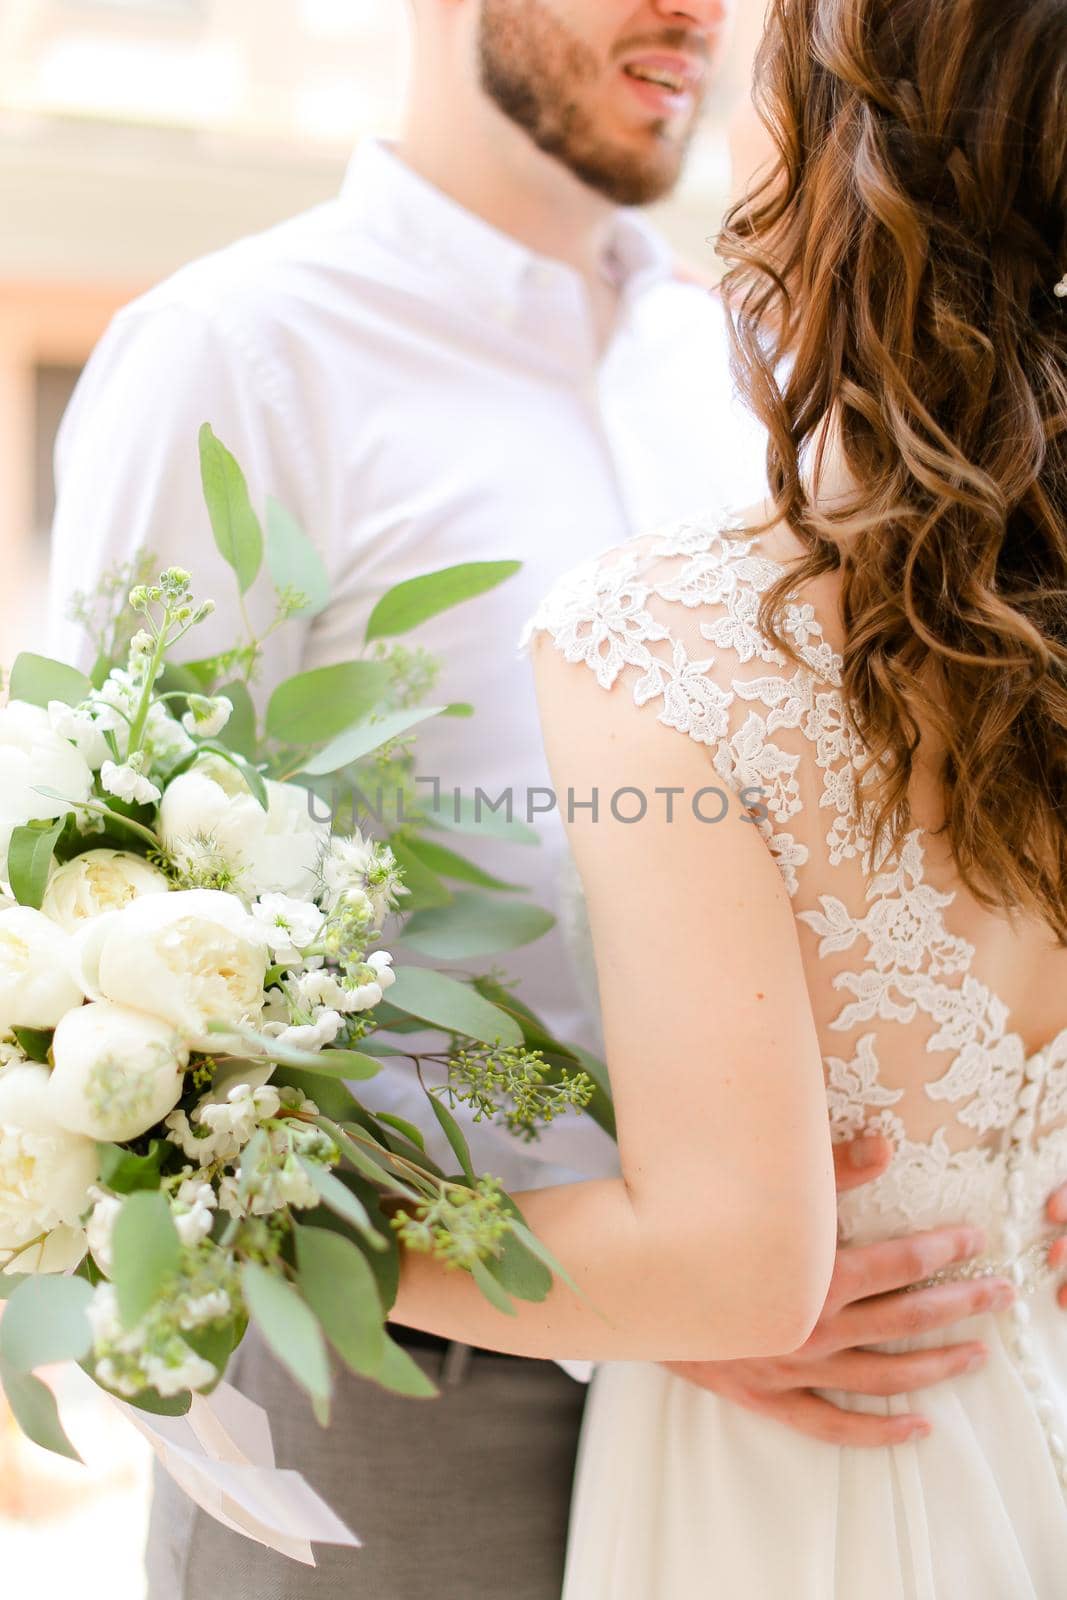 Happy european groom kissing bride keeping bouquet of flowers. Concept of love and wedding photo session.